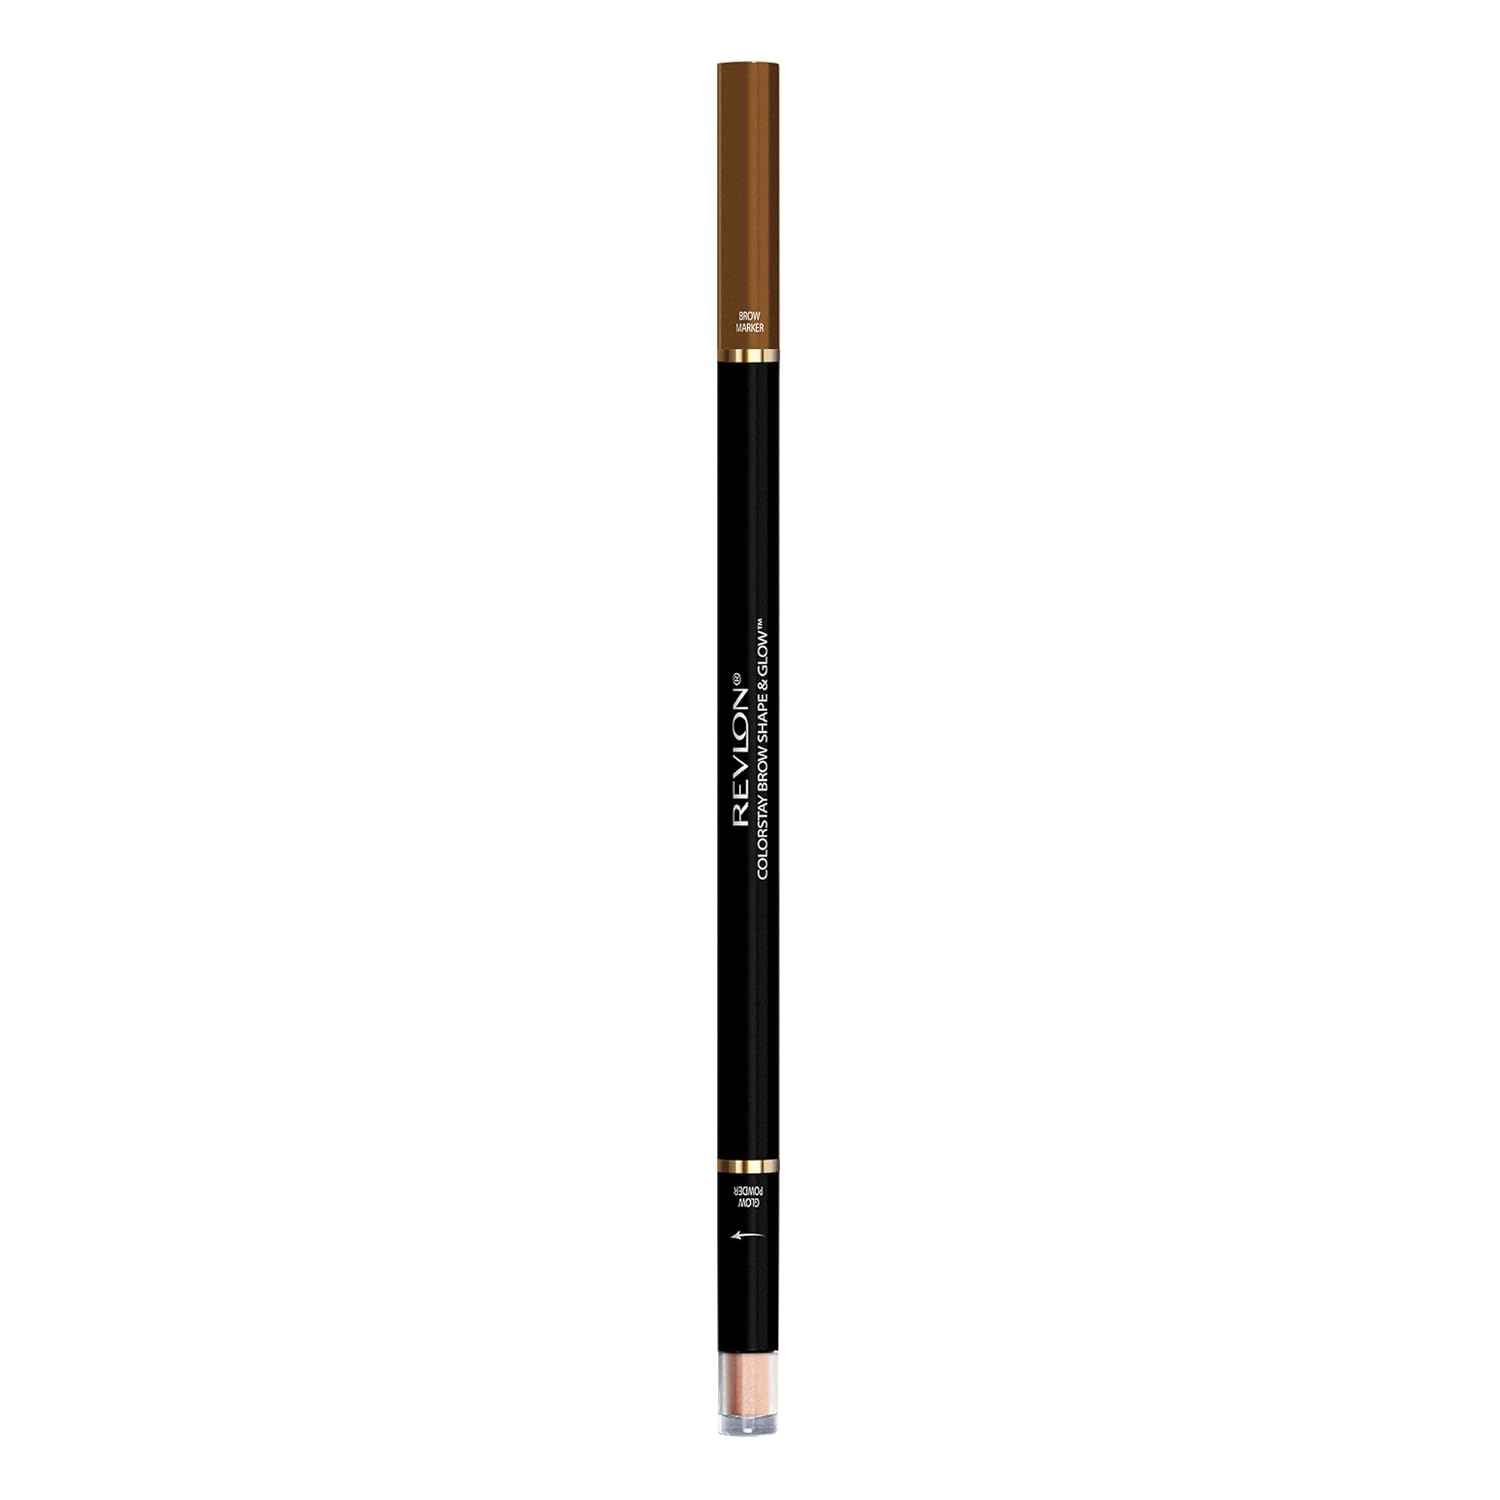 Revlon Colorstay Shape & Glow Eye Brow Marker and Highlighter, Soft Brown (0.02  (Marker), 0.008  (Highlighter)),1 Count